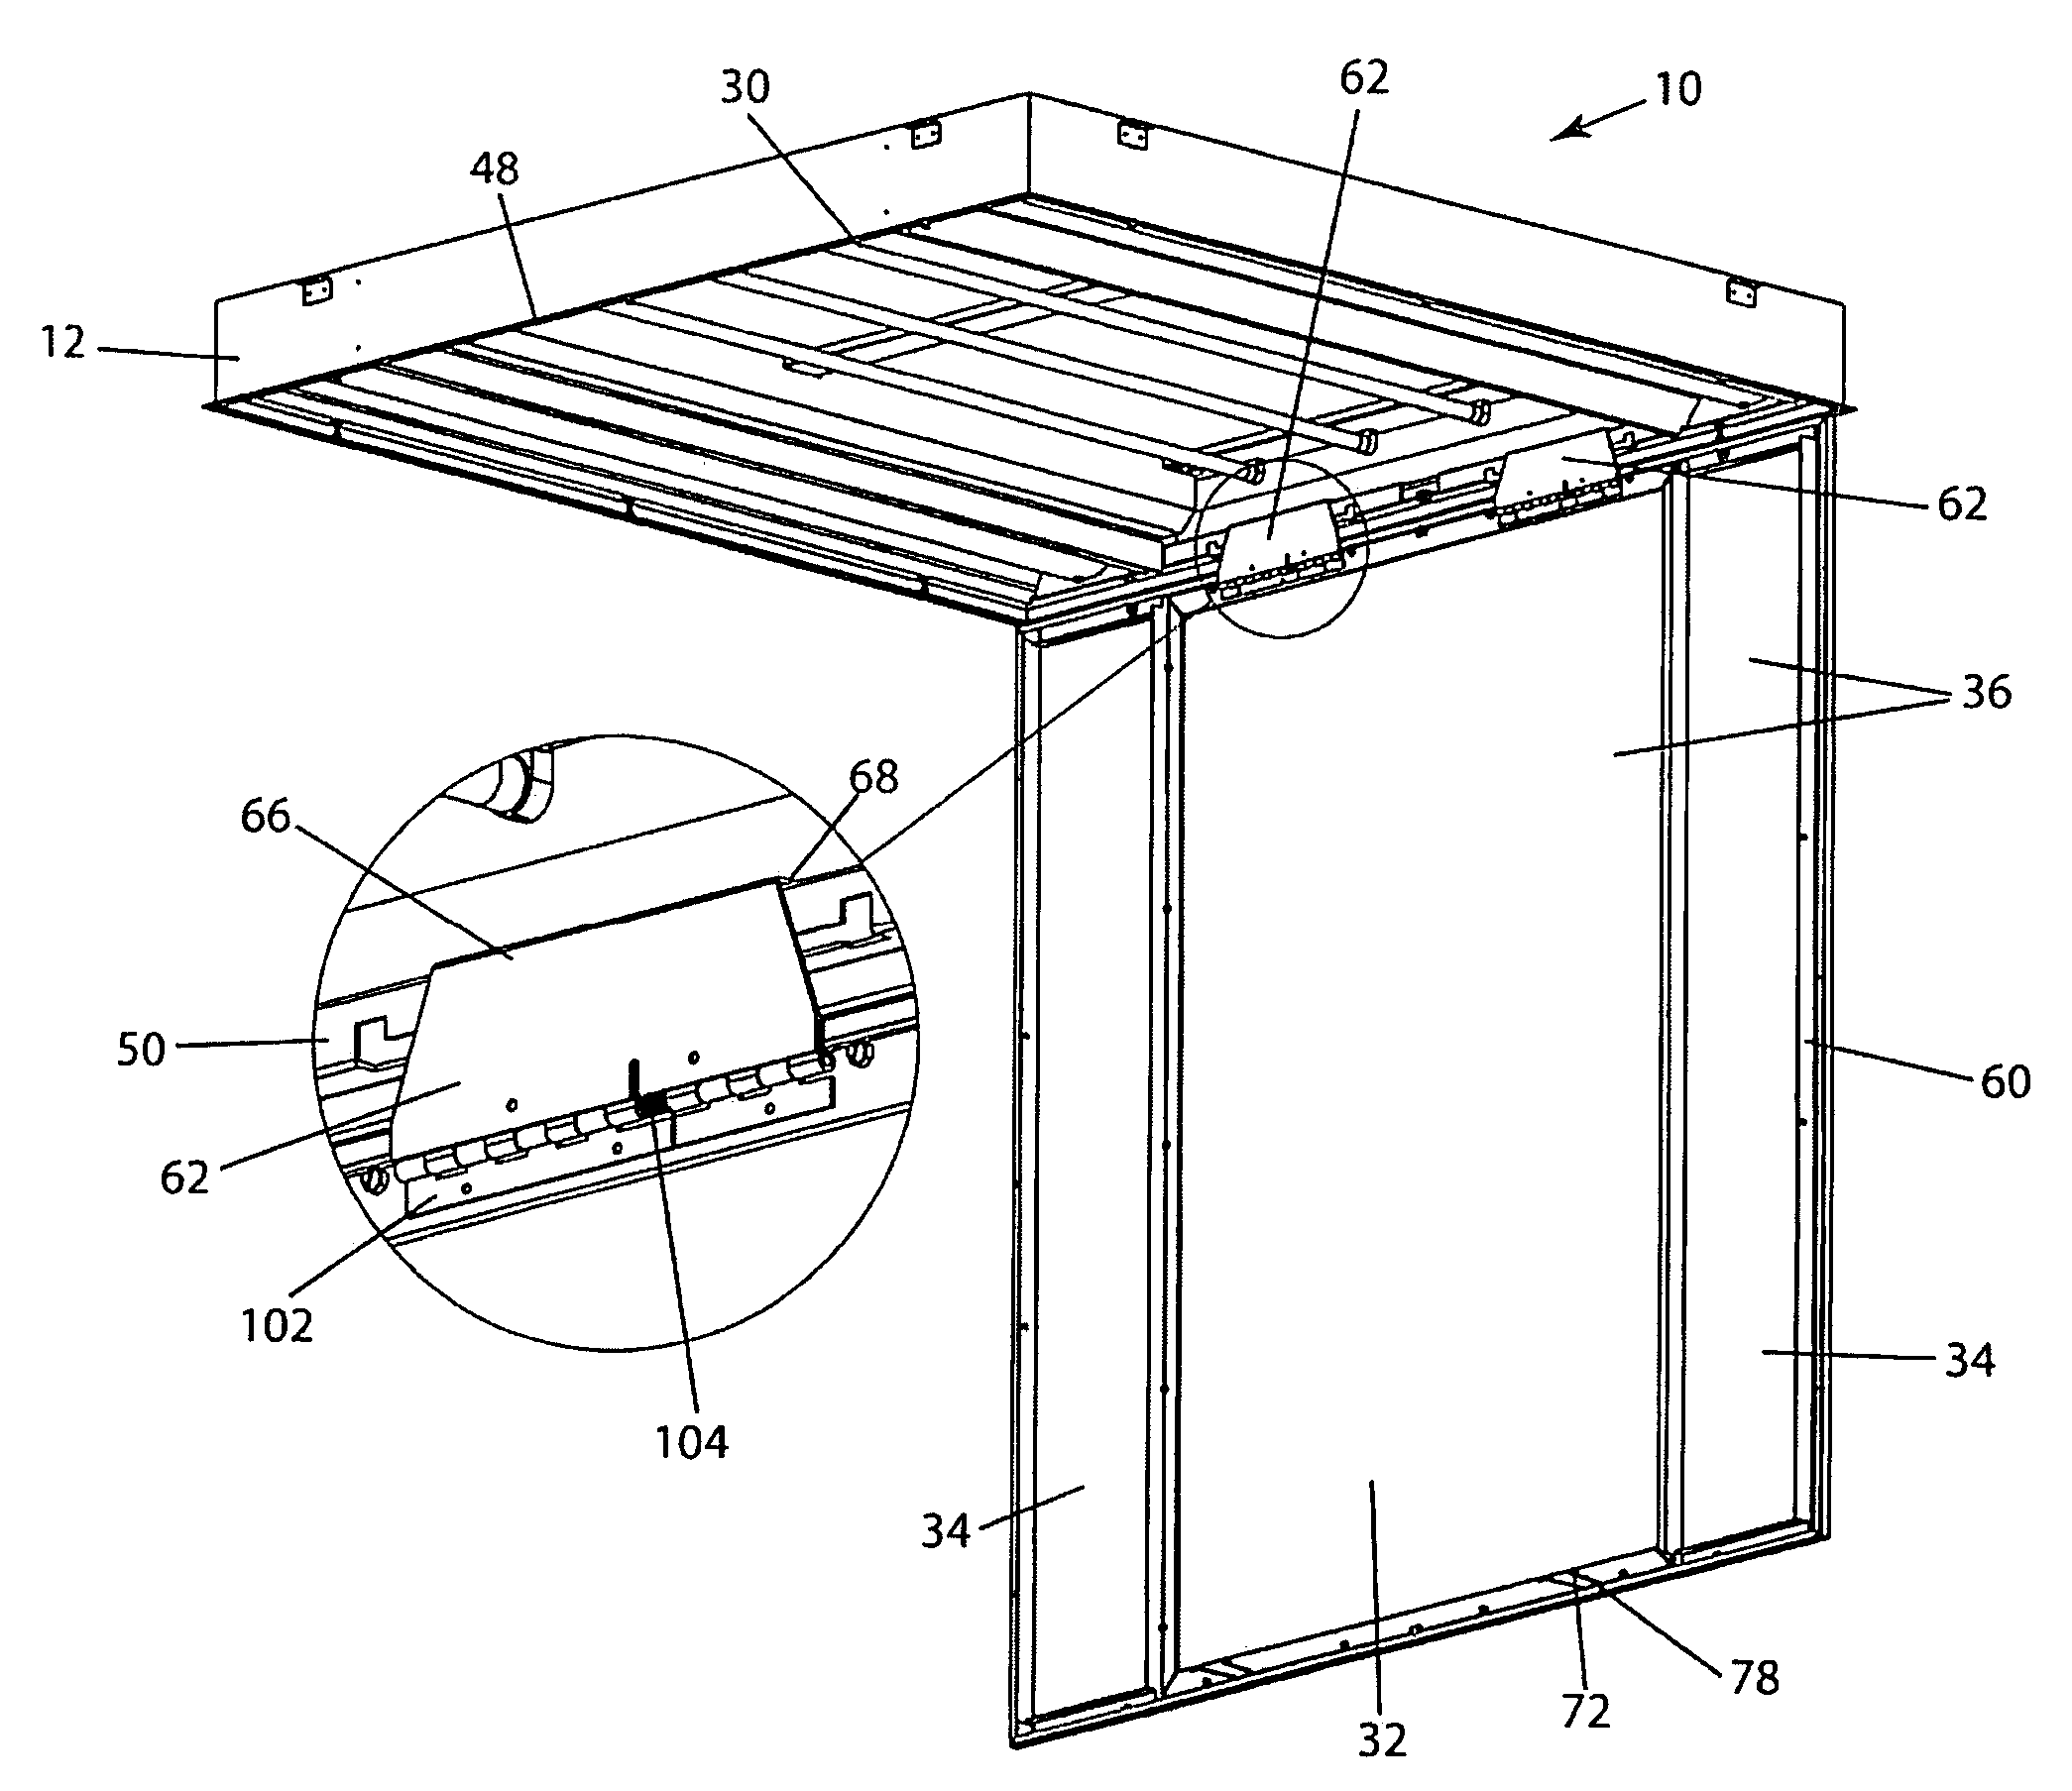 Ceiling-mounted troffer-type light fixture